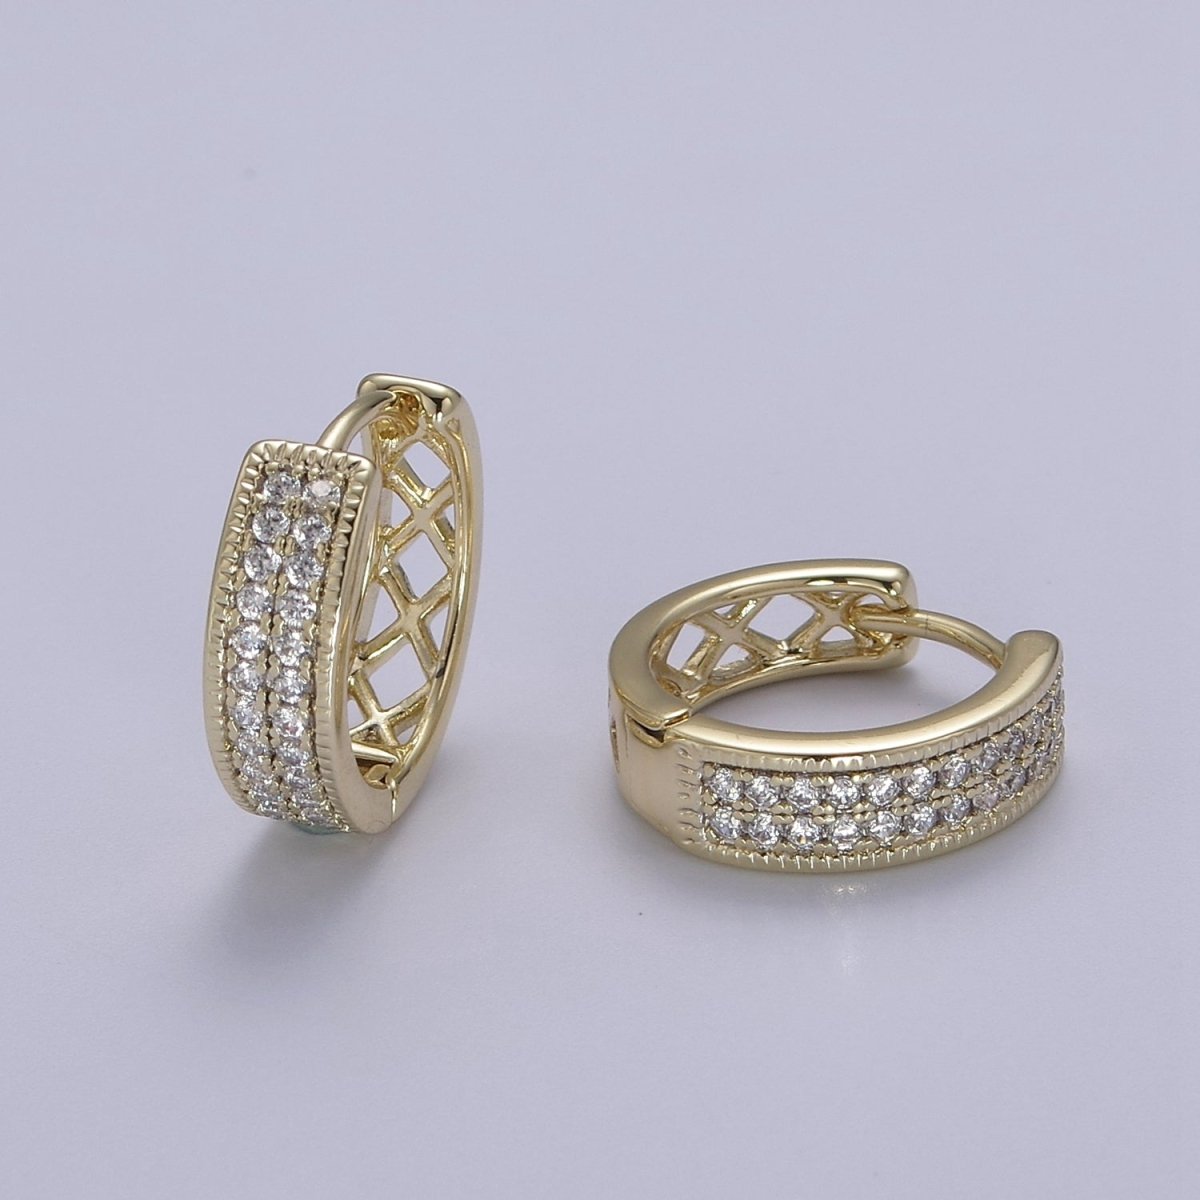 Thick Gold Hoop 16mm Earring 14k Gold Filled CZ Huggie Earring Jewelry V-146 - DLUXCA